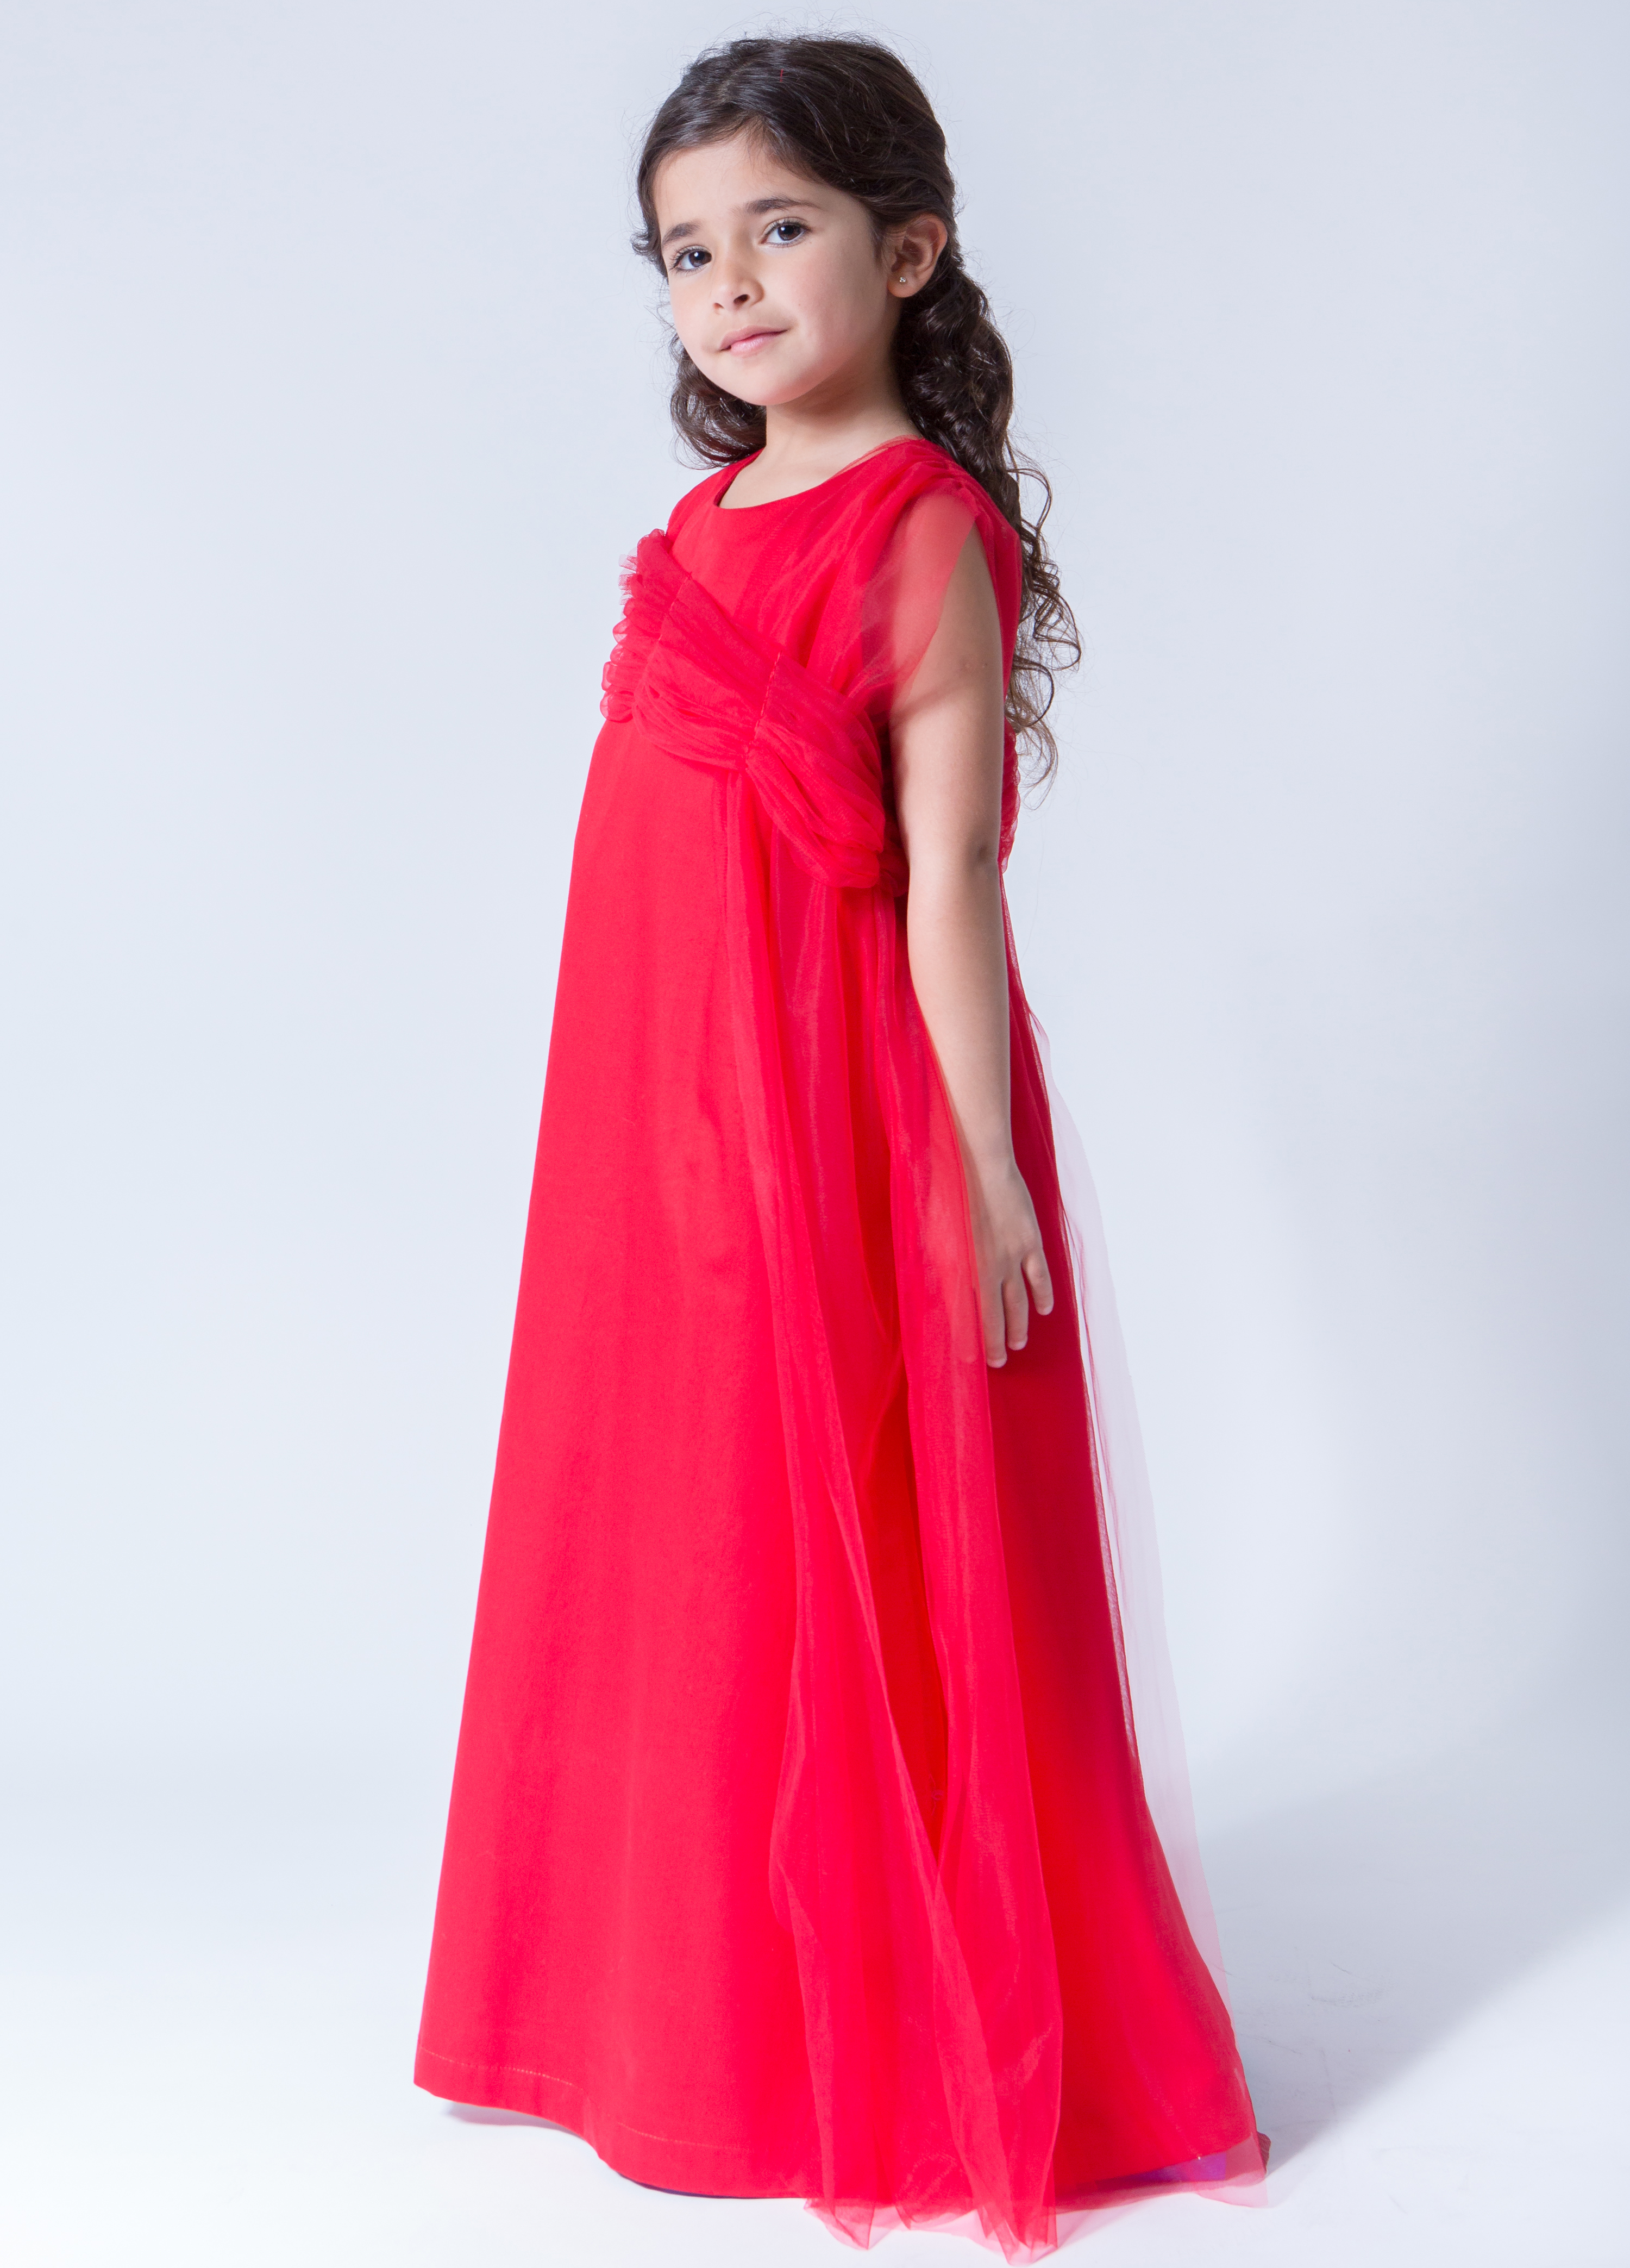                                                                                     Myazaa - Red Dress with tulle